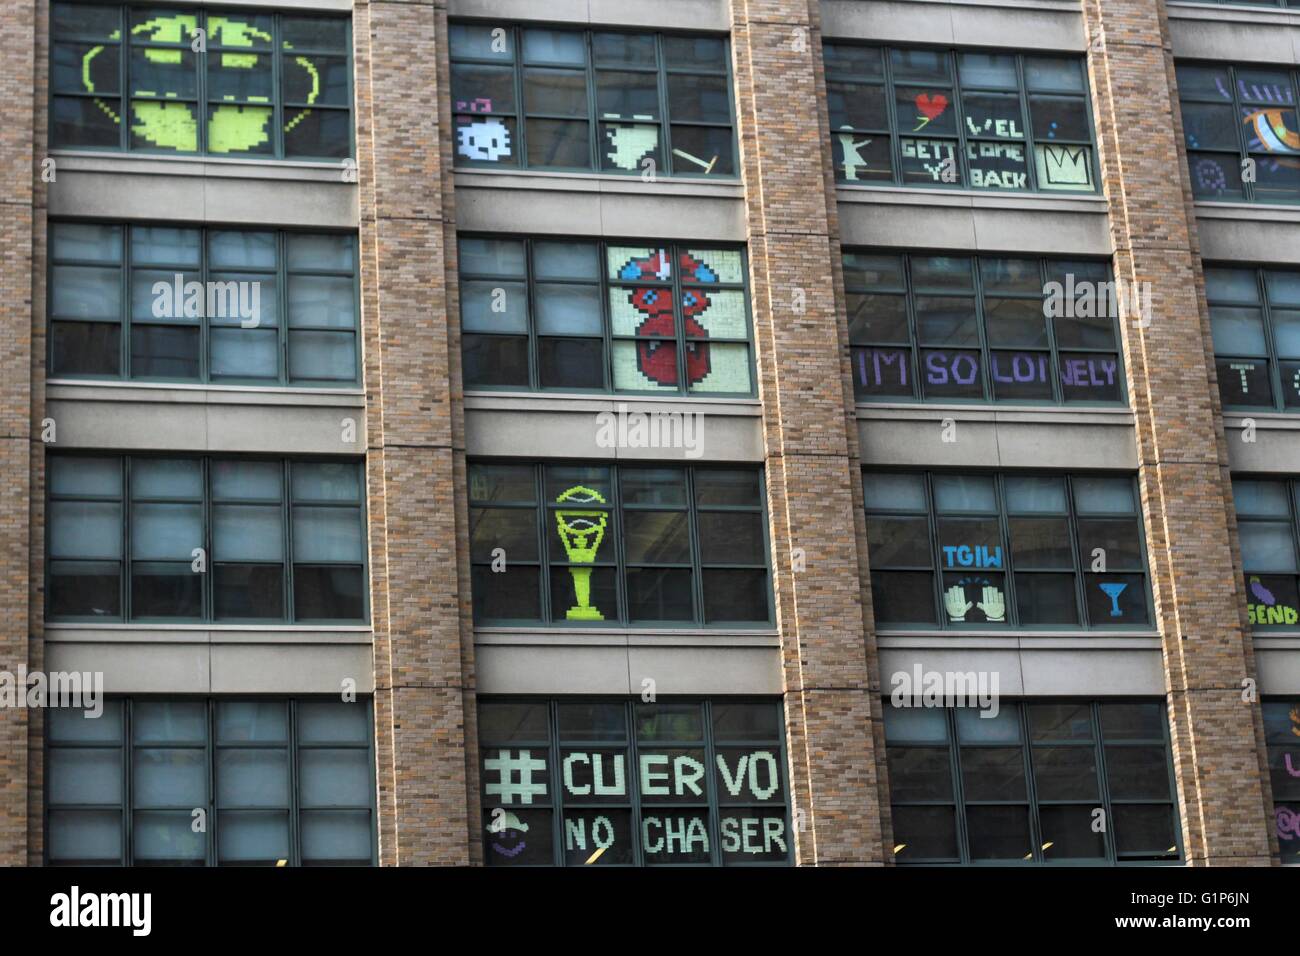 Post-it notes war breaks out in New York City Stock Photo